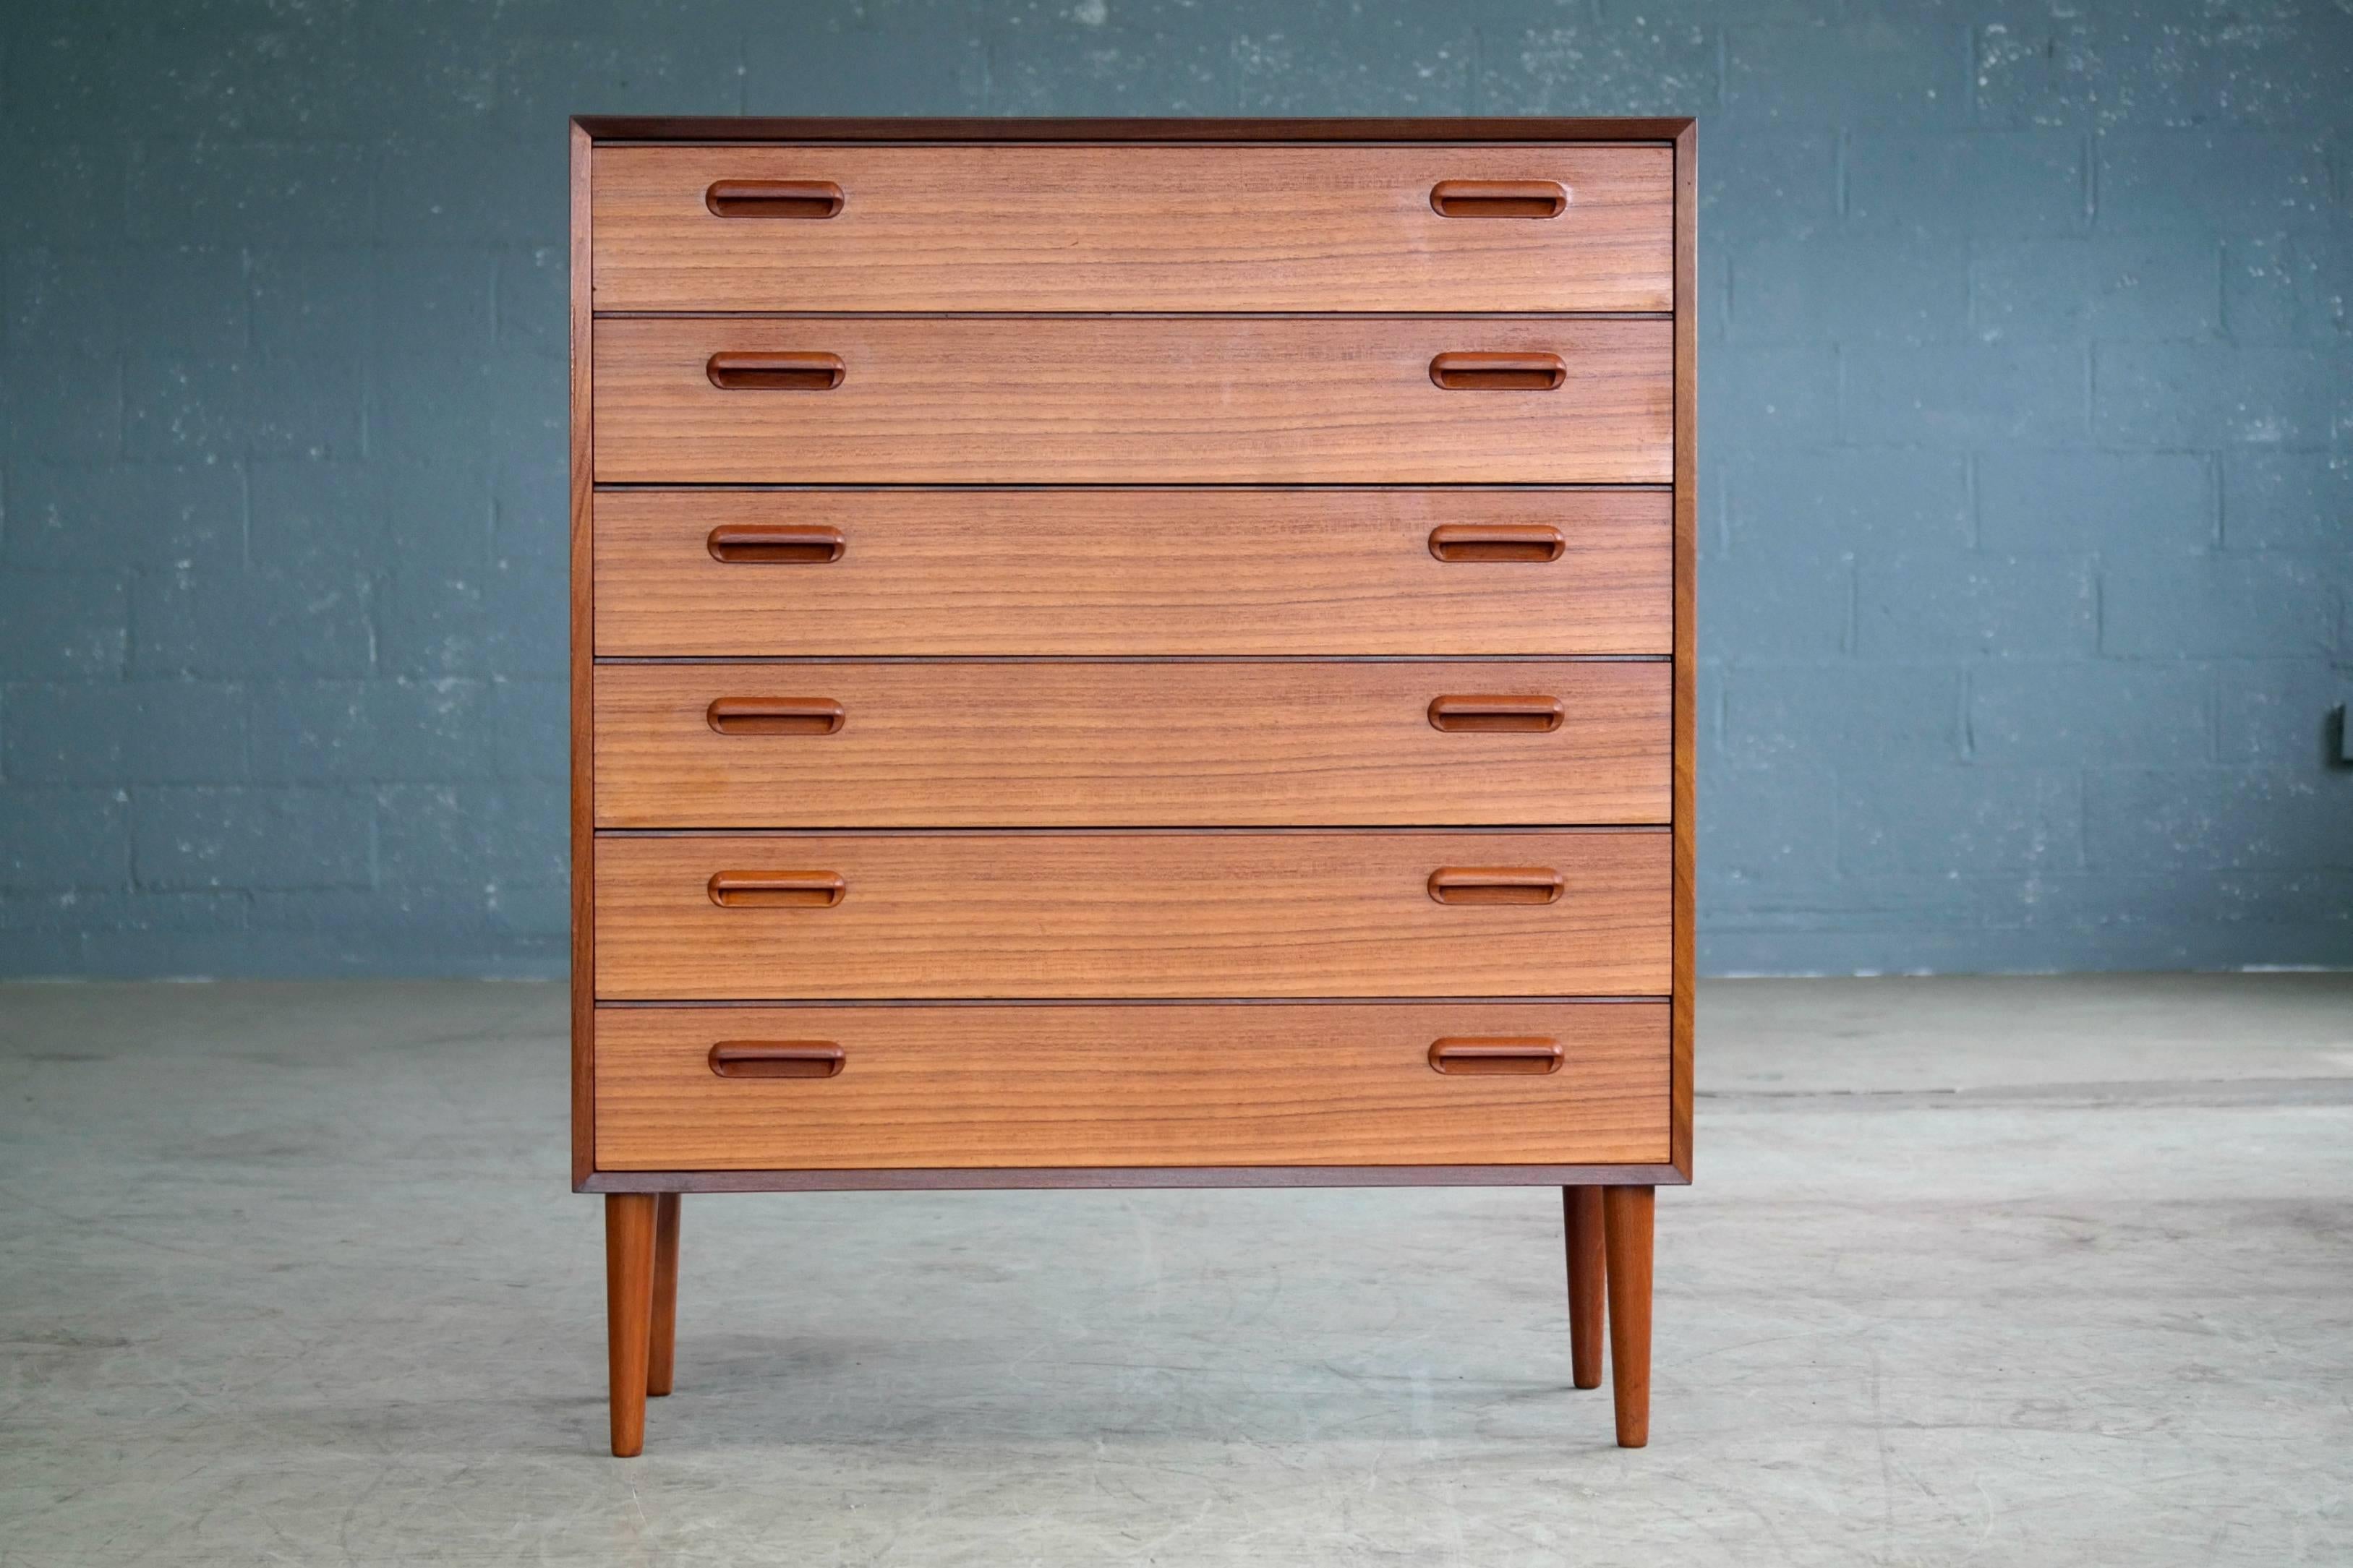 Super elegant tallboy dresser in the style of Ib Kofod-Larsen. Kofod Larsen very much liked sharp simple yet very elegant lines and also preferred to cut the grains so they would run in a horizontal pattern on the front of the drawers. Further, he